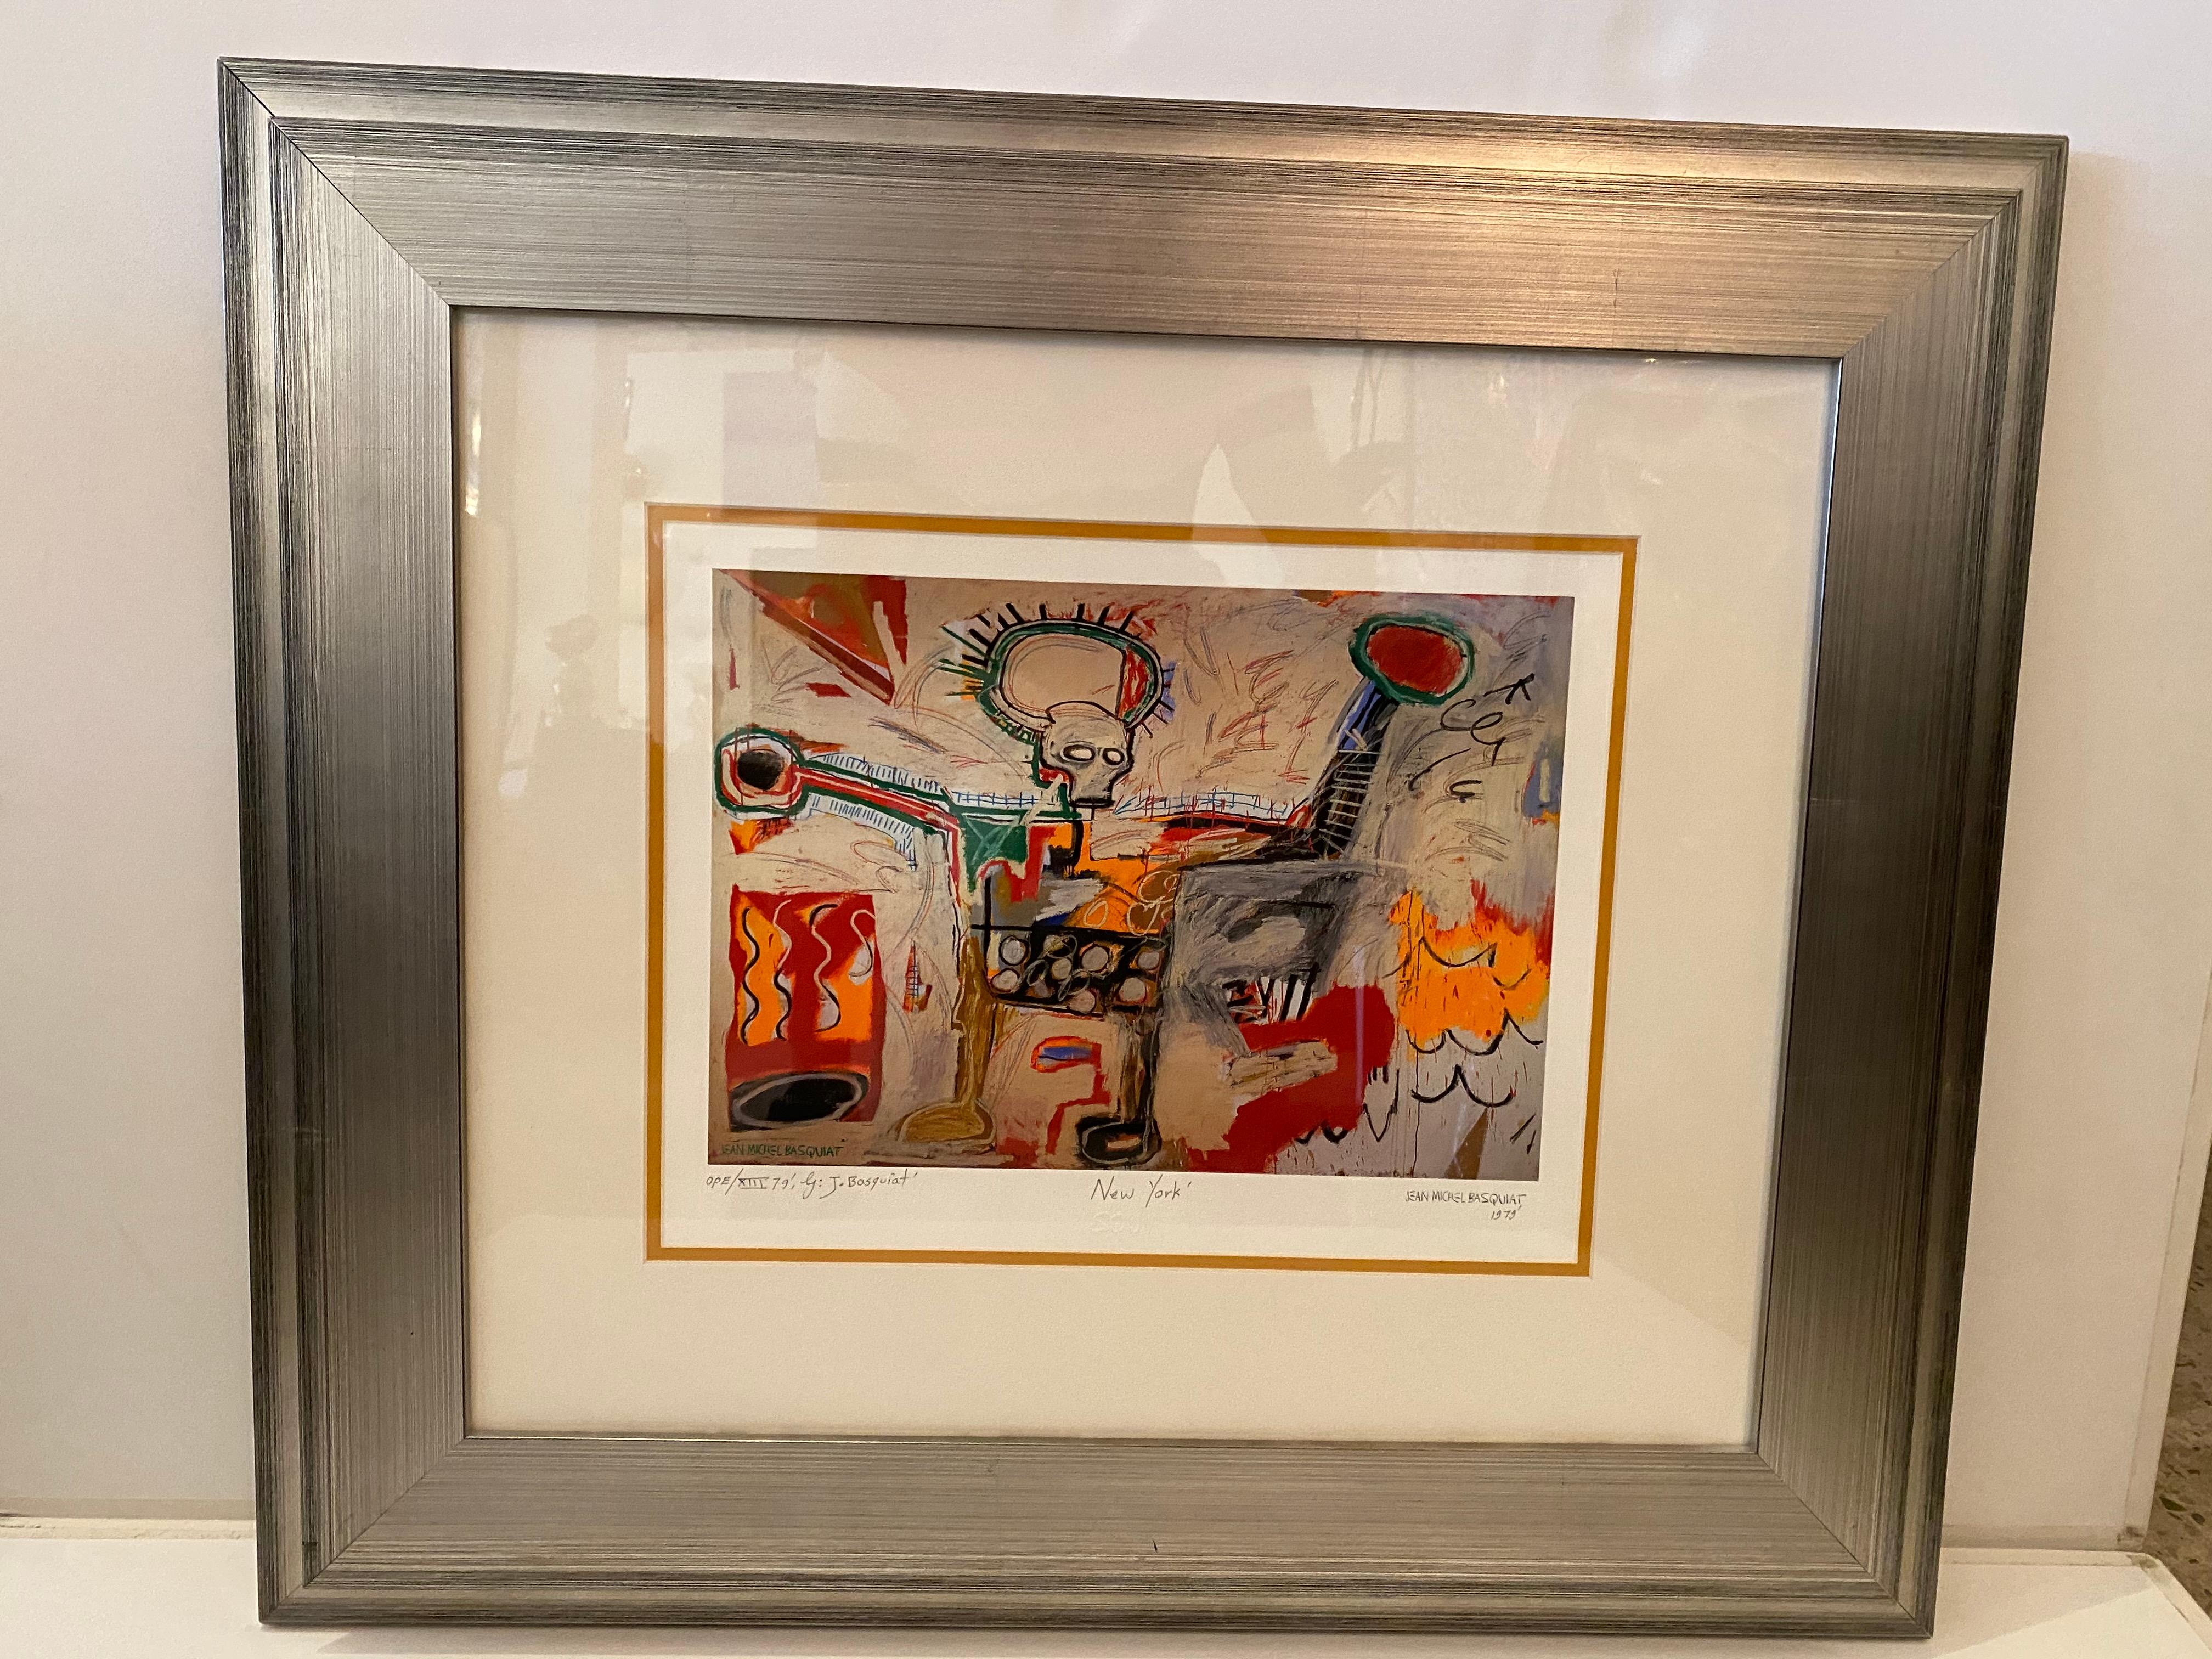 Signed limited edition print by Jean Michel Basquiat. 
Certificate of Authenticity en verso. 
Beautifully matted and framed
From an Important Palm Springs CA, Collection.